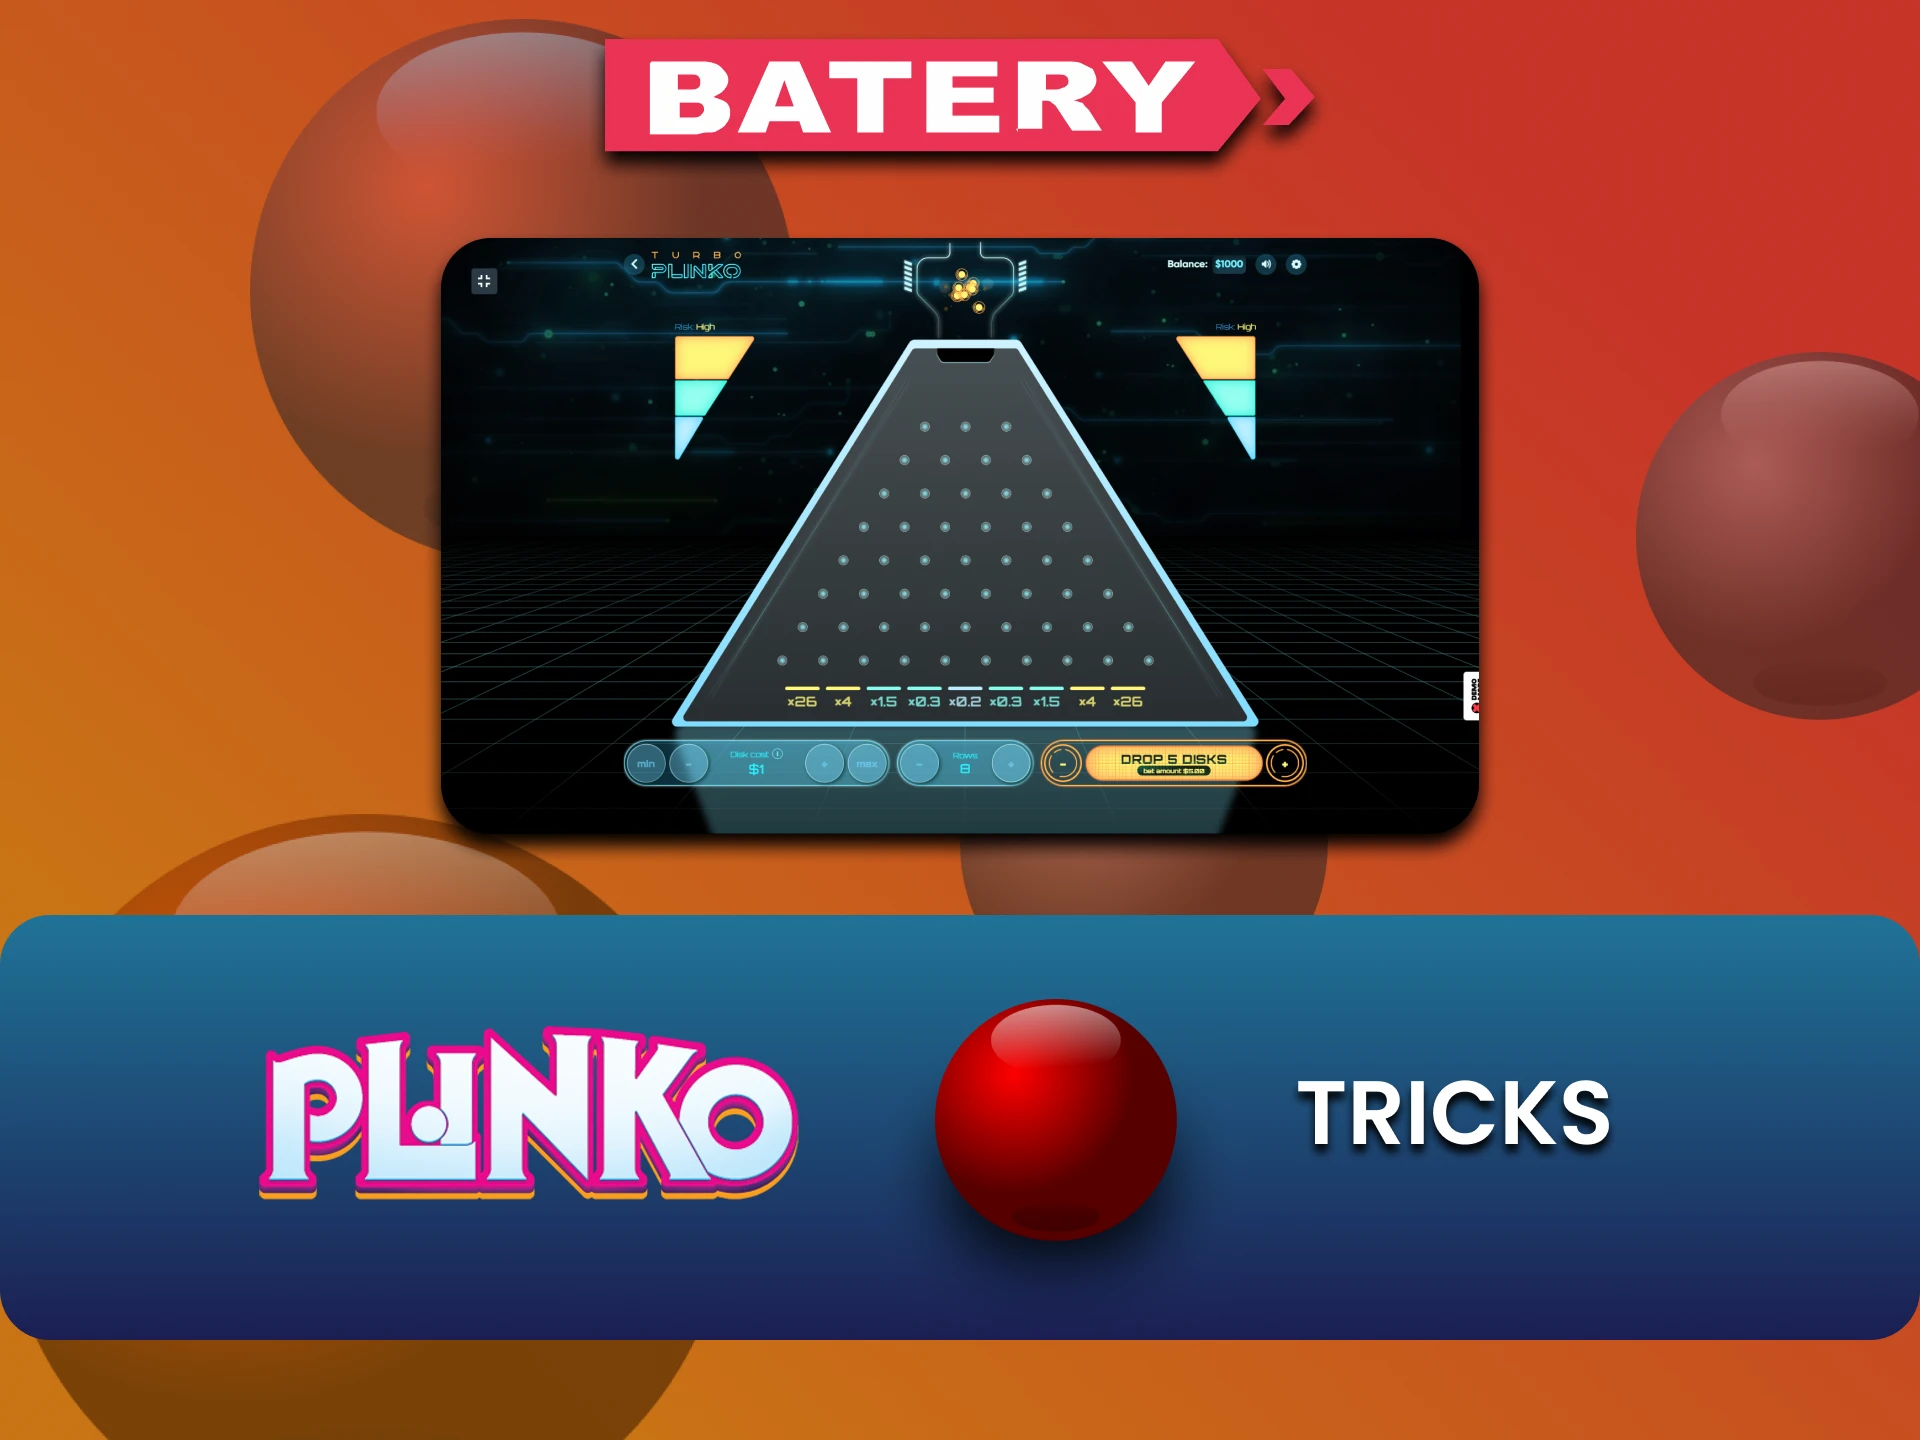 We will tell you about tricks for winning Plinko on Batery.